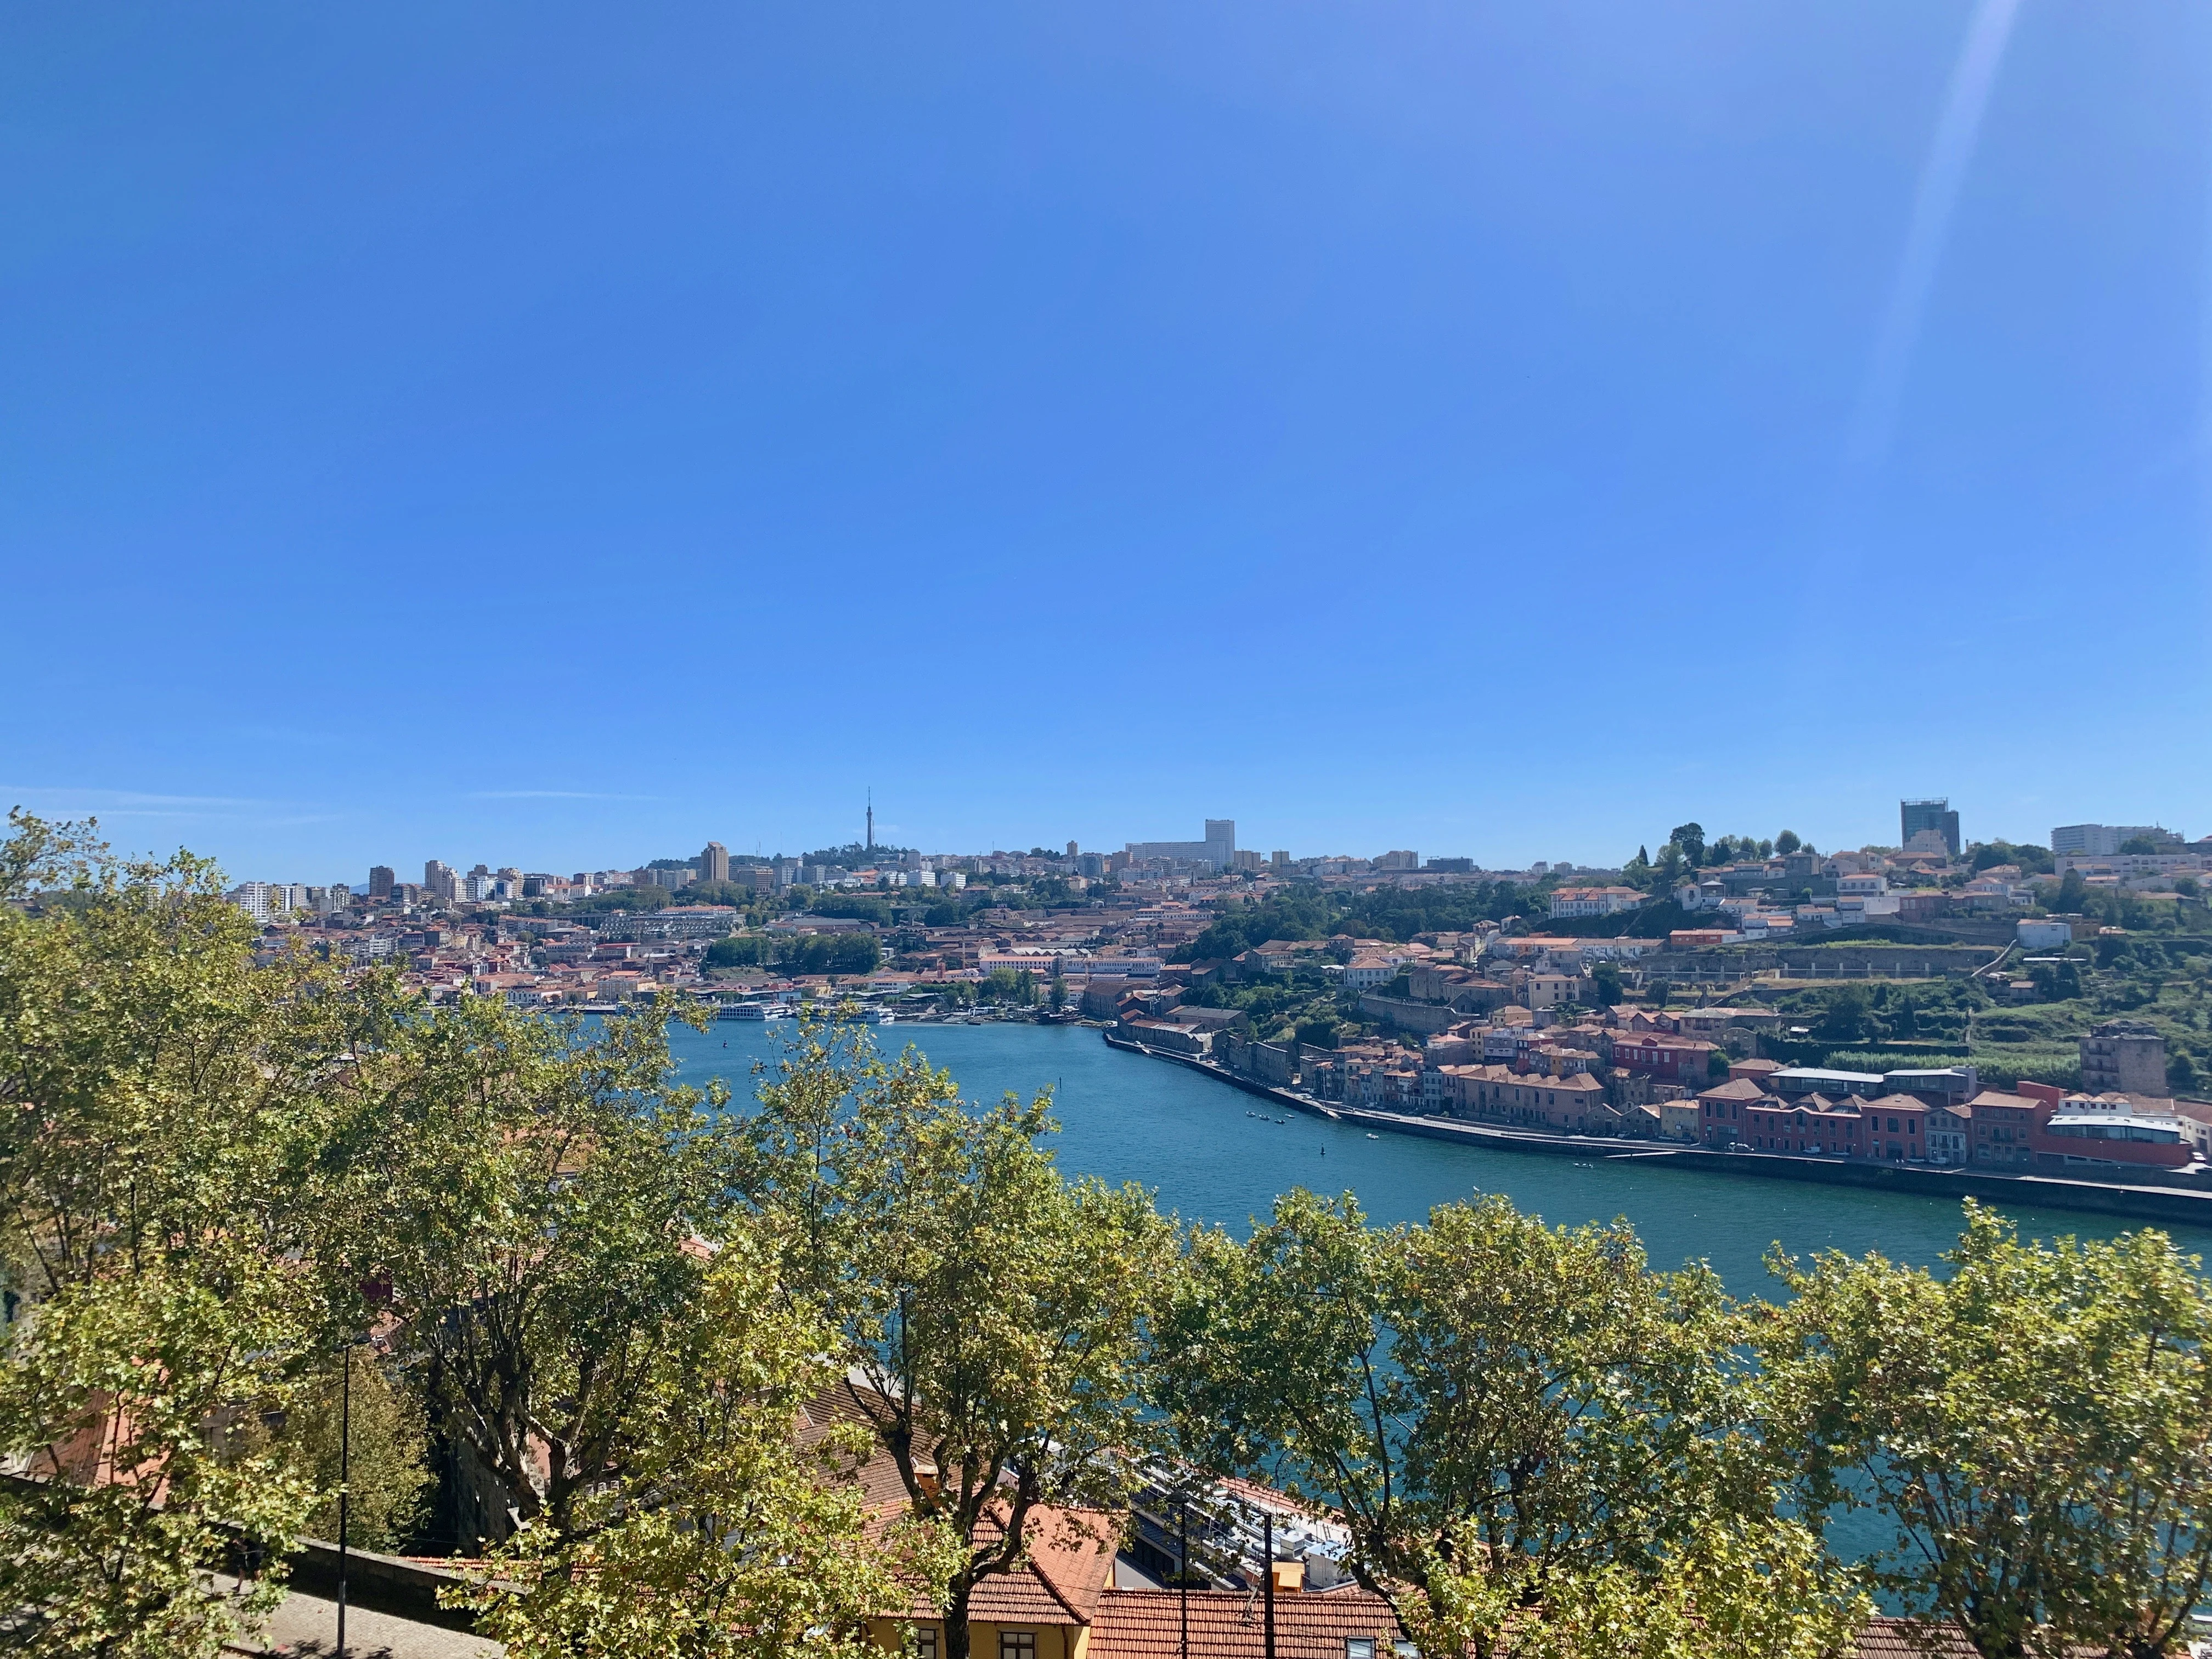 View or the Douro River from the Crystal Palace Gardens in the Cedofeita neighborhood